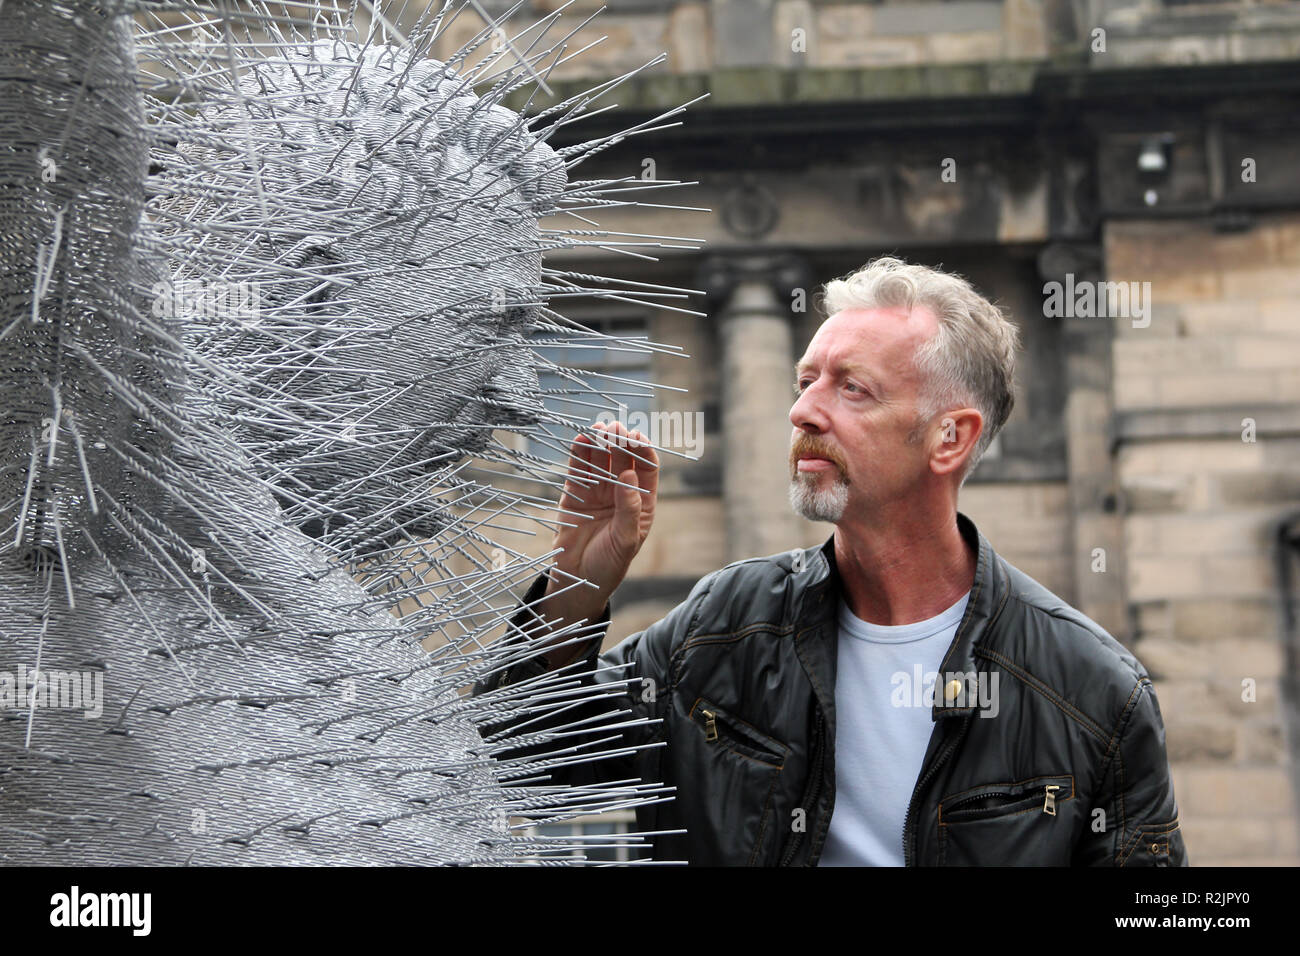 The Scottish artist, and Turner prize nominee, David Mach, makes a last minute adjustment to one of his coathanger sculptures before it is displayed outside St Giles Cathedral in Edinburgh 2010. Stock Photo